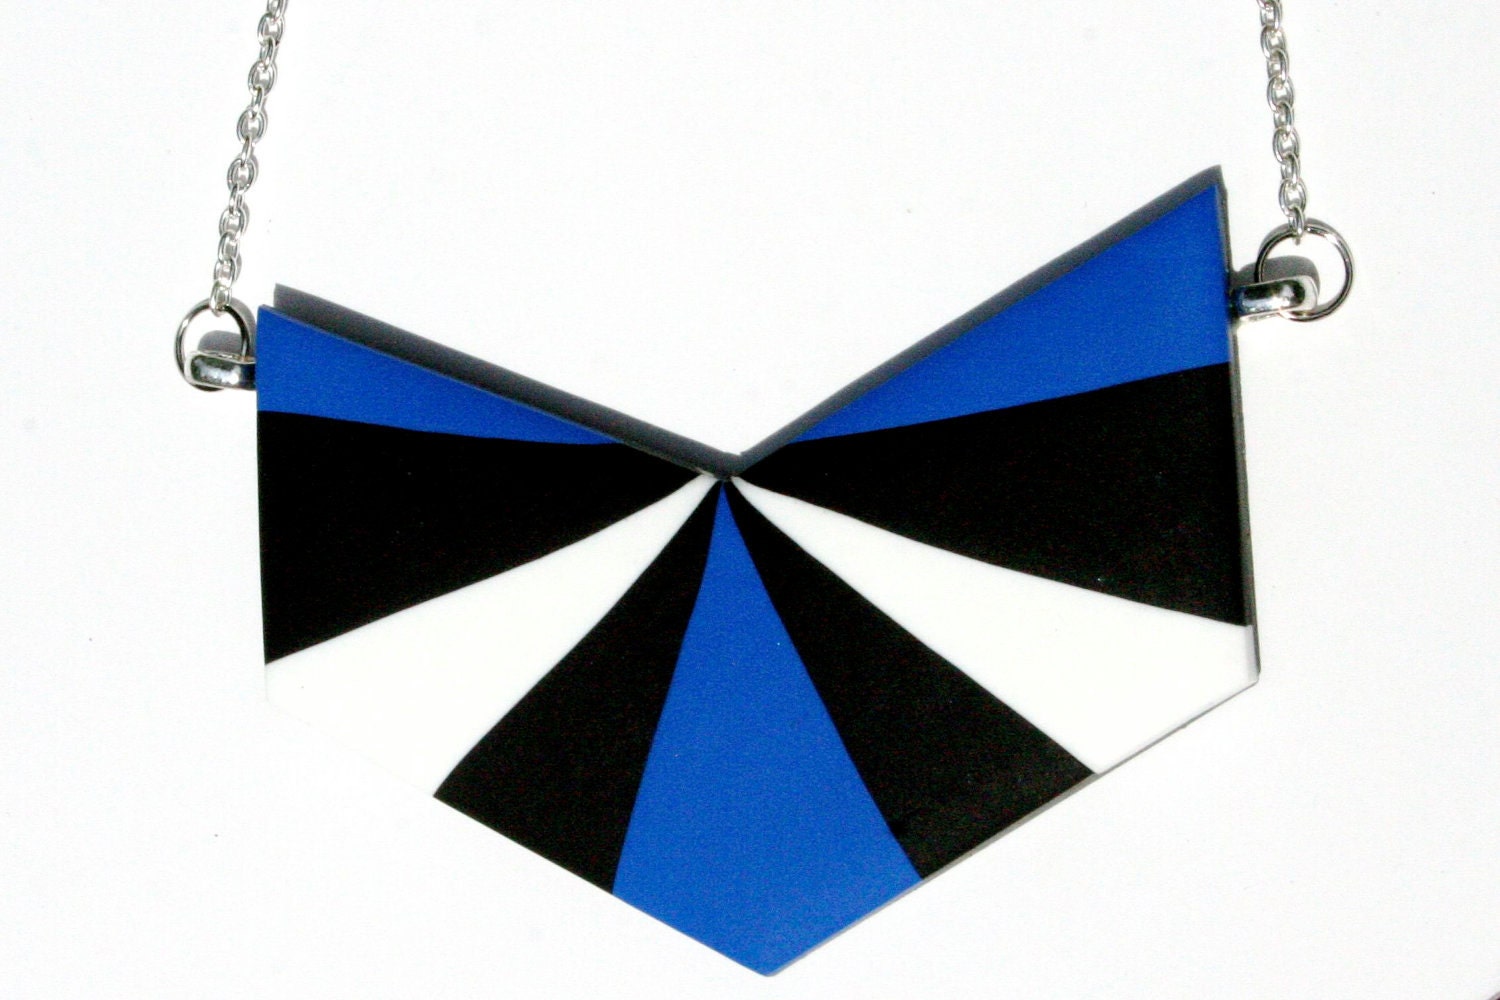 Chevron Necklace in Electric Blue Black and White